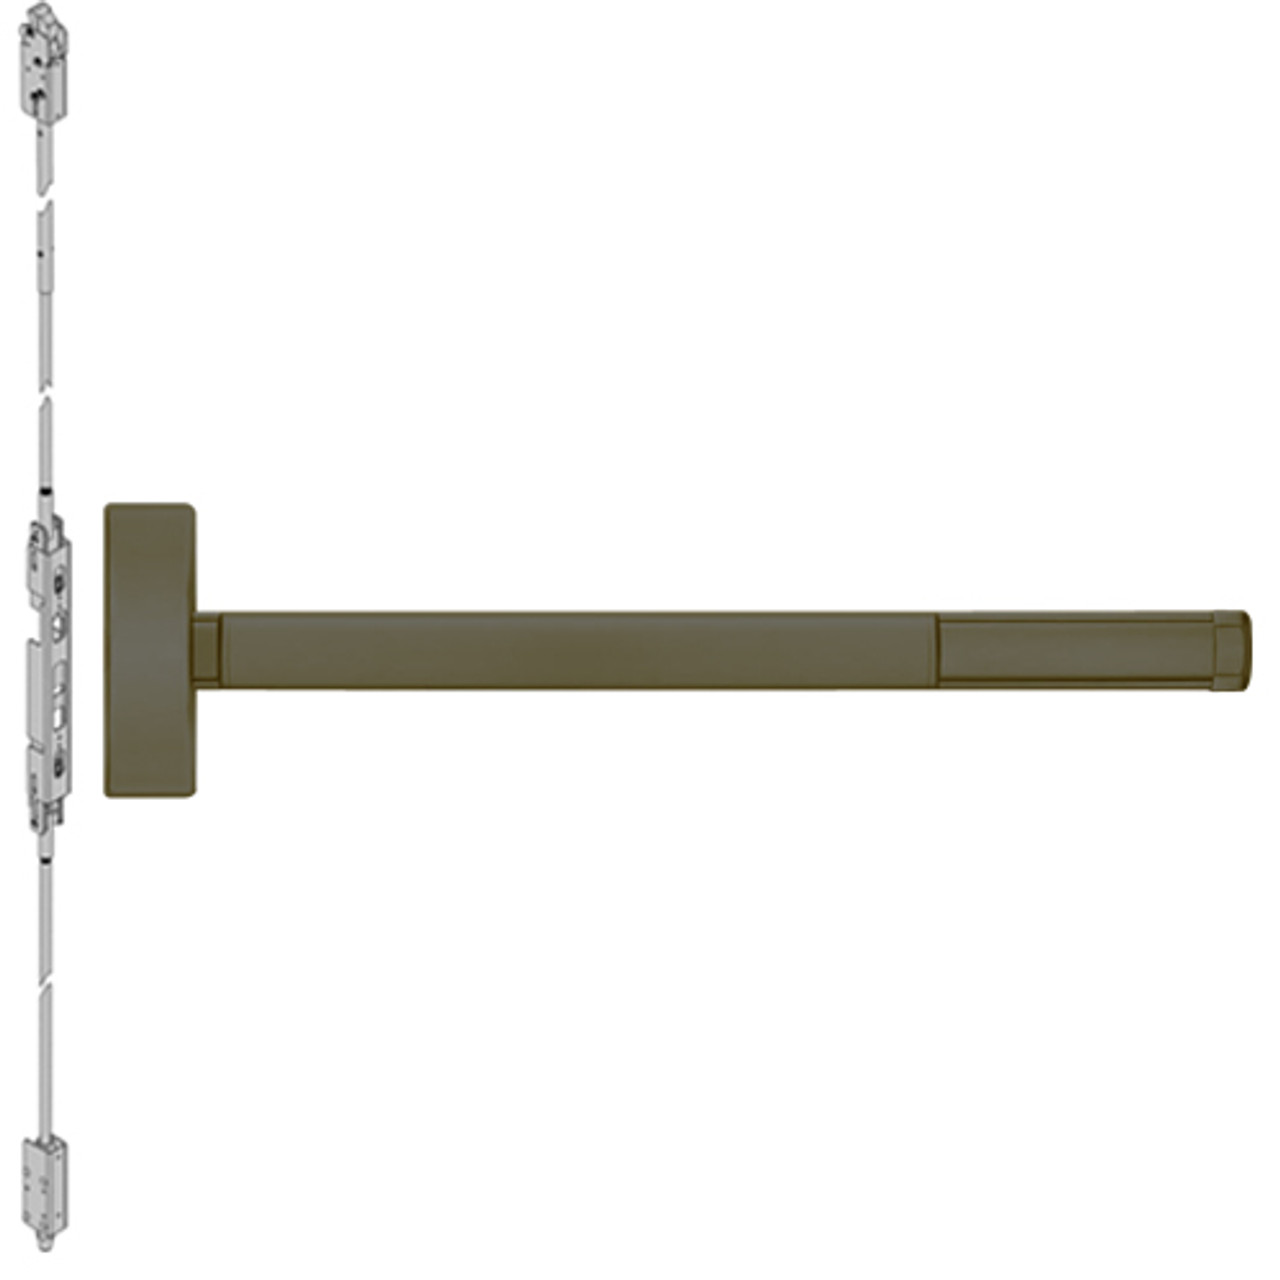 ELRFL2814LBR-613-36 PHI 2800 Series Fire Rated Concealed Vertical Rod Exit Device with Electric Latch Retraction Prepped for Lever-Knob Always Active in Oil Rubbed Bronze Finish